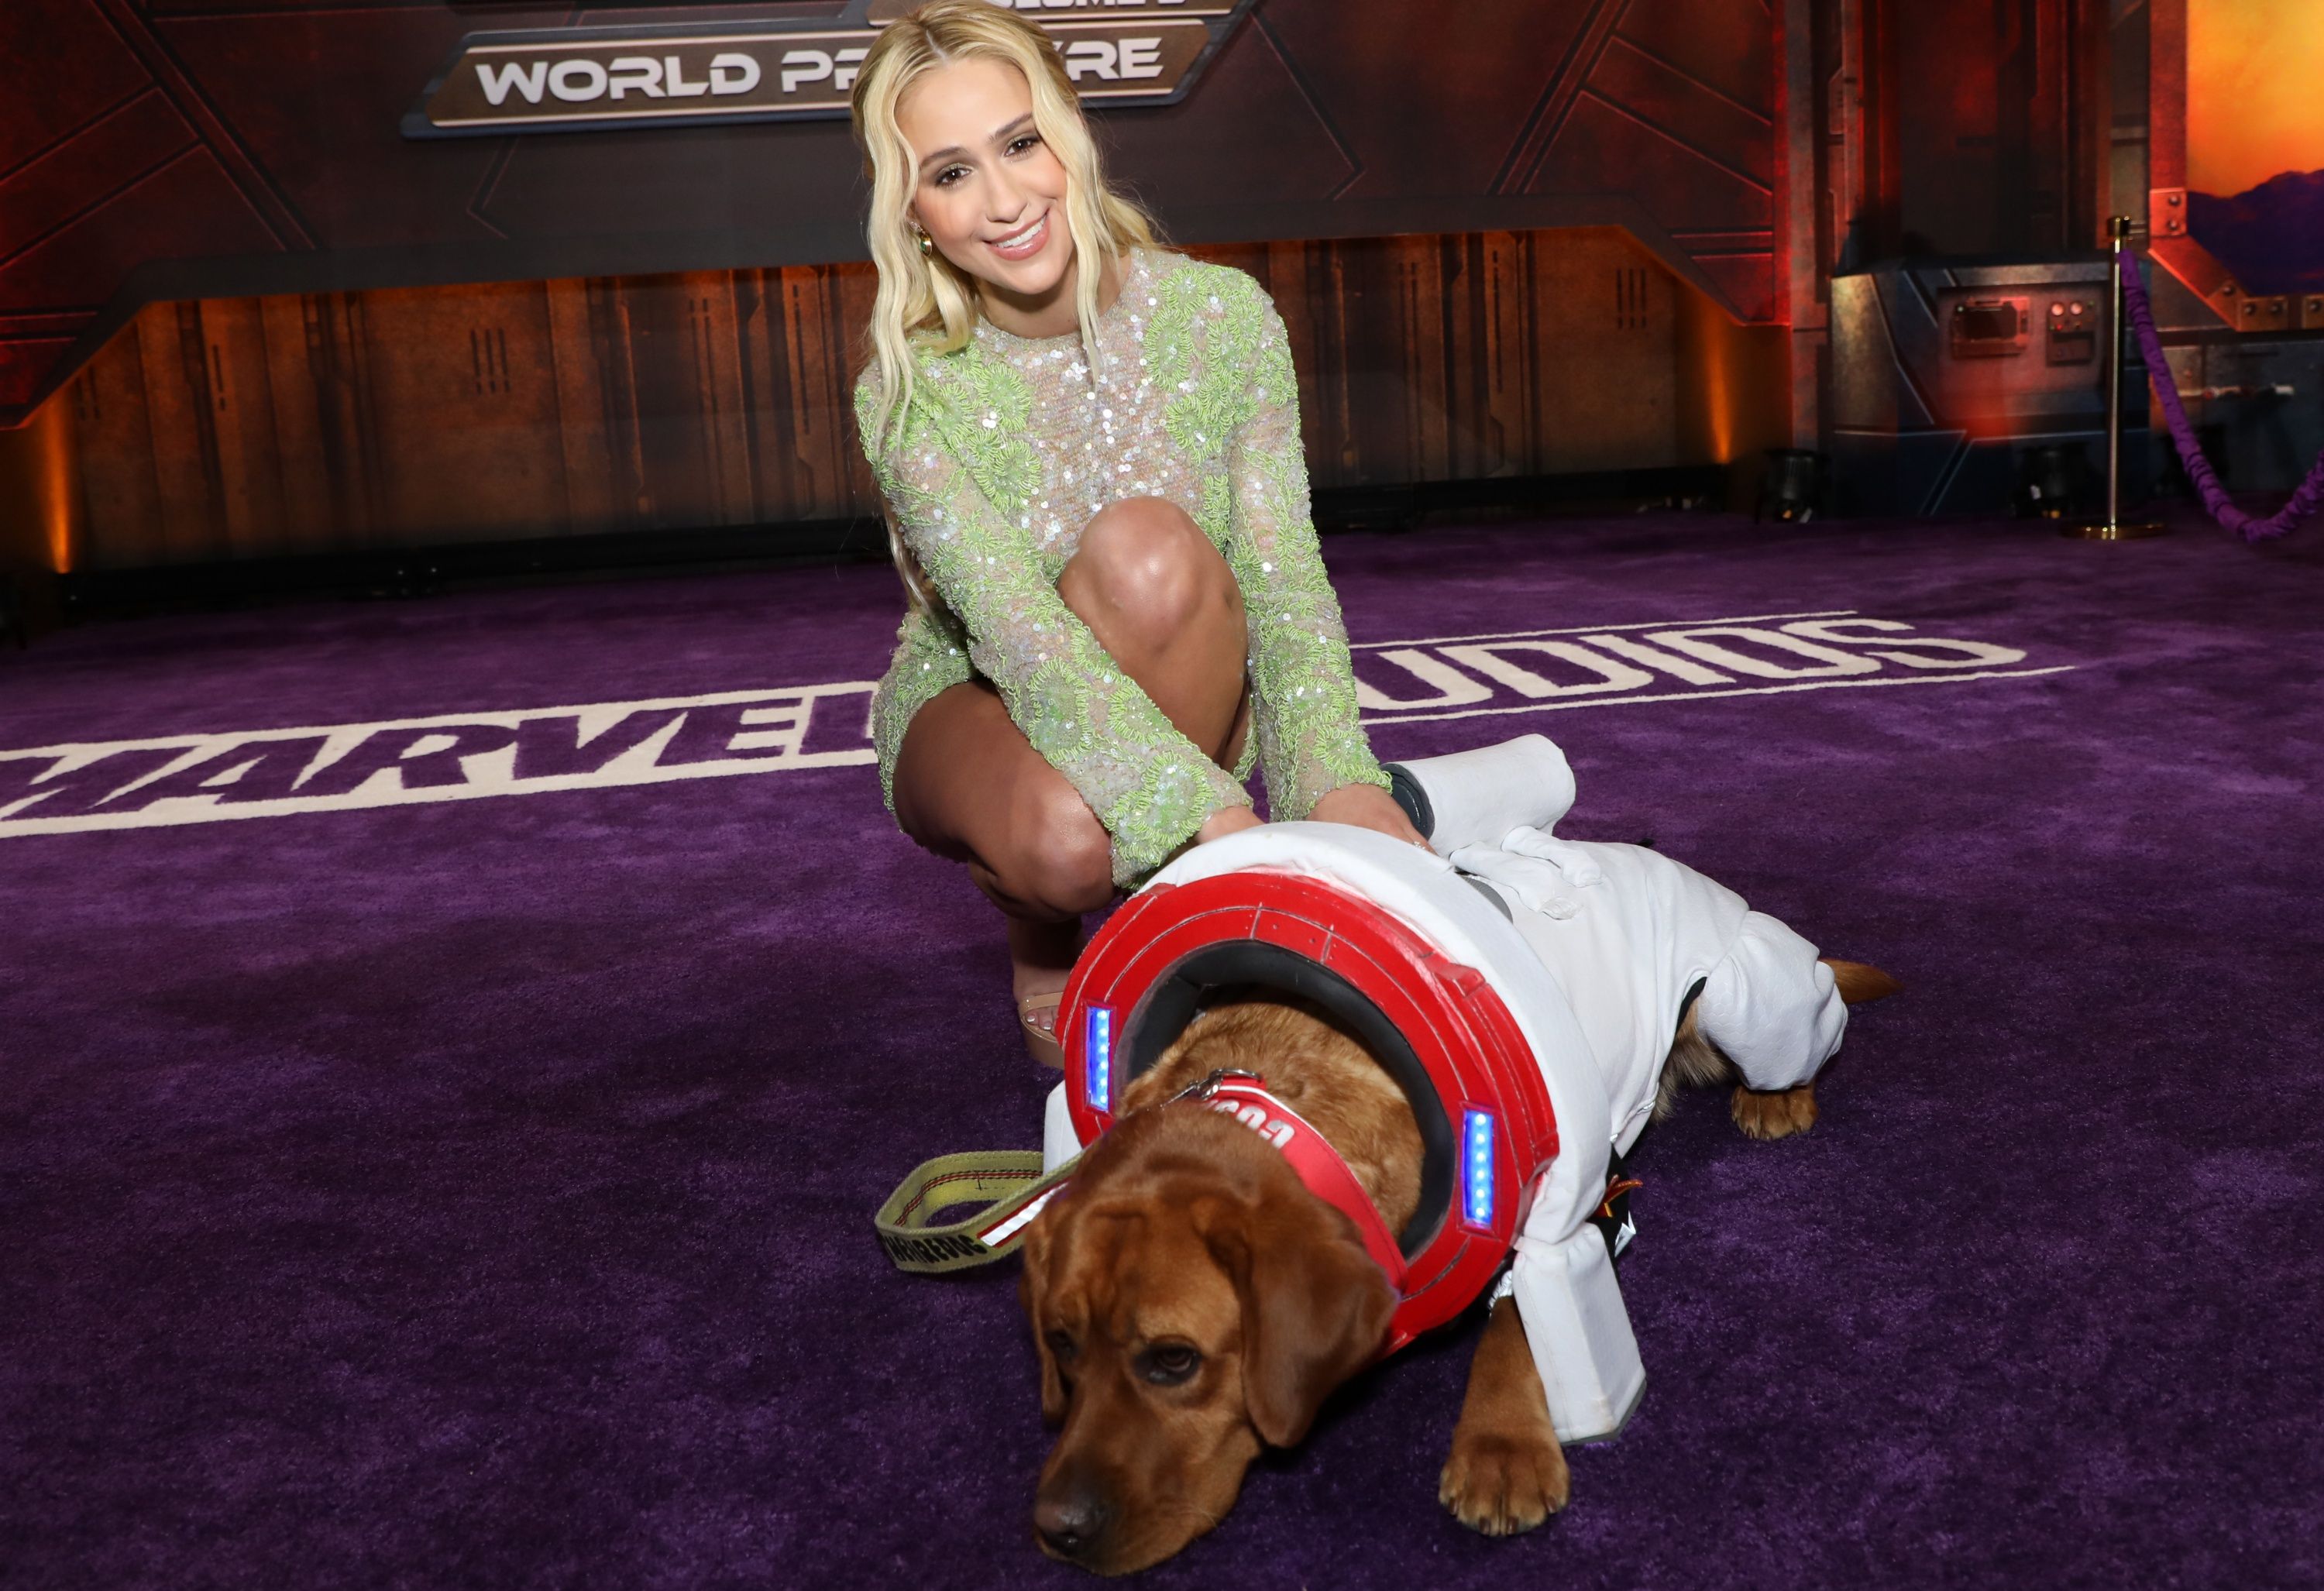 Maria Bakalova and Cosmo attend the Guardians of the Galaxy Vol. 3 premiere at the Dolby Theatre in Hollywood, CA on Thursday, April 27, 2023